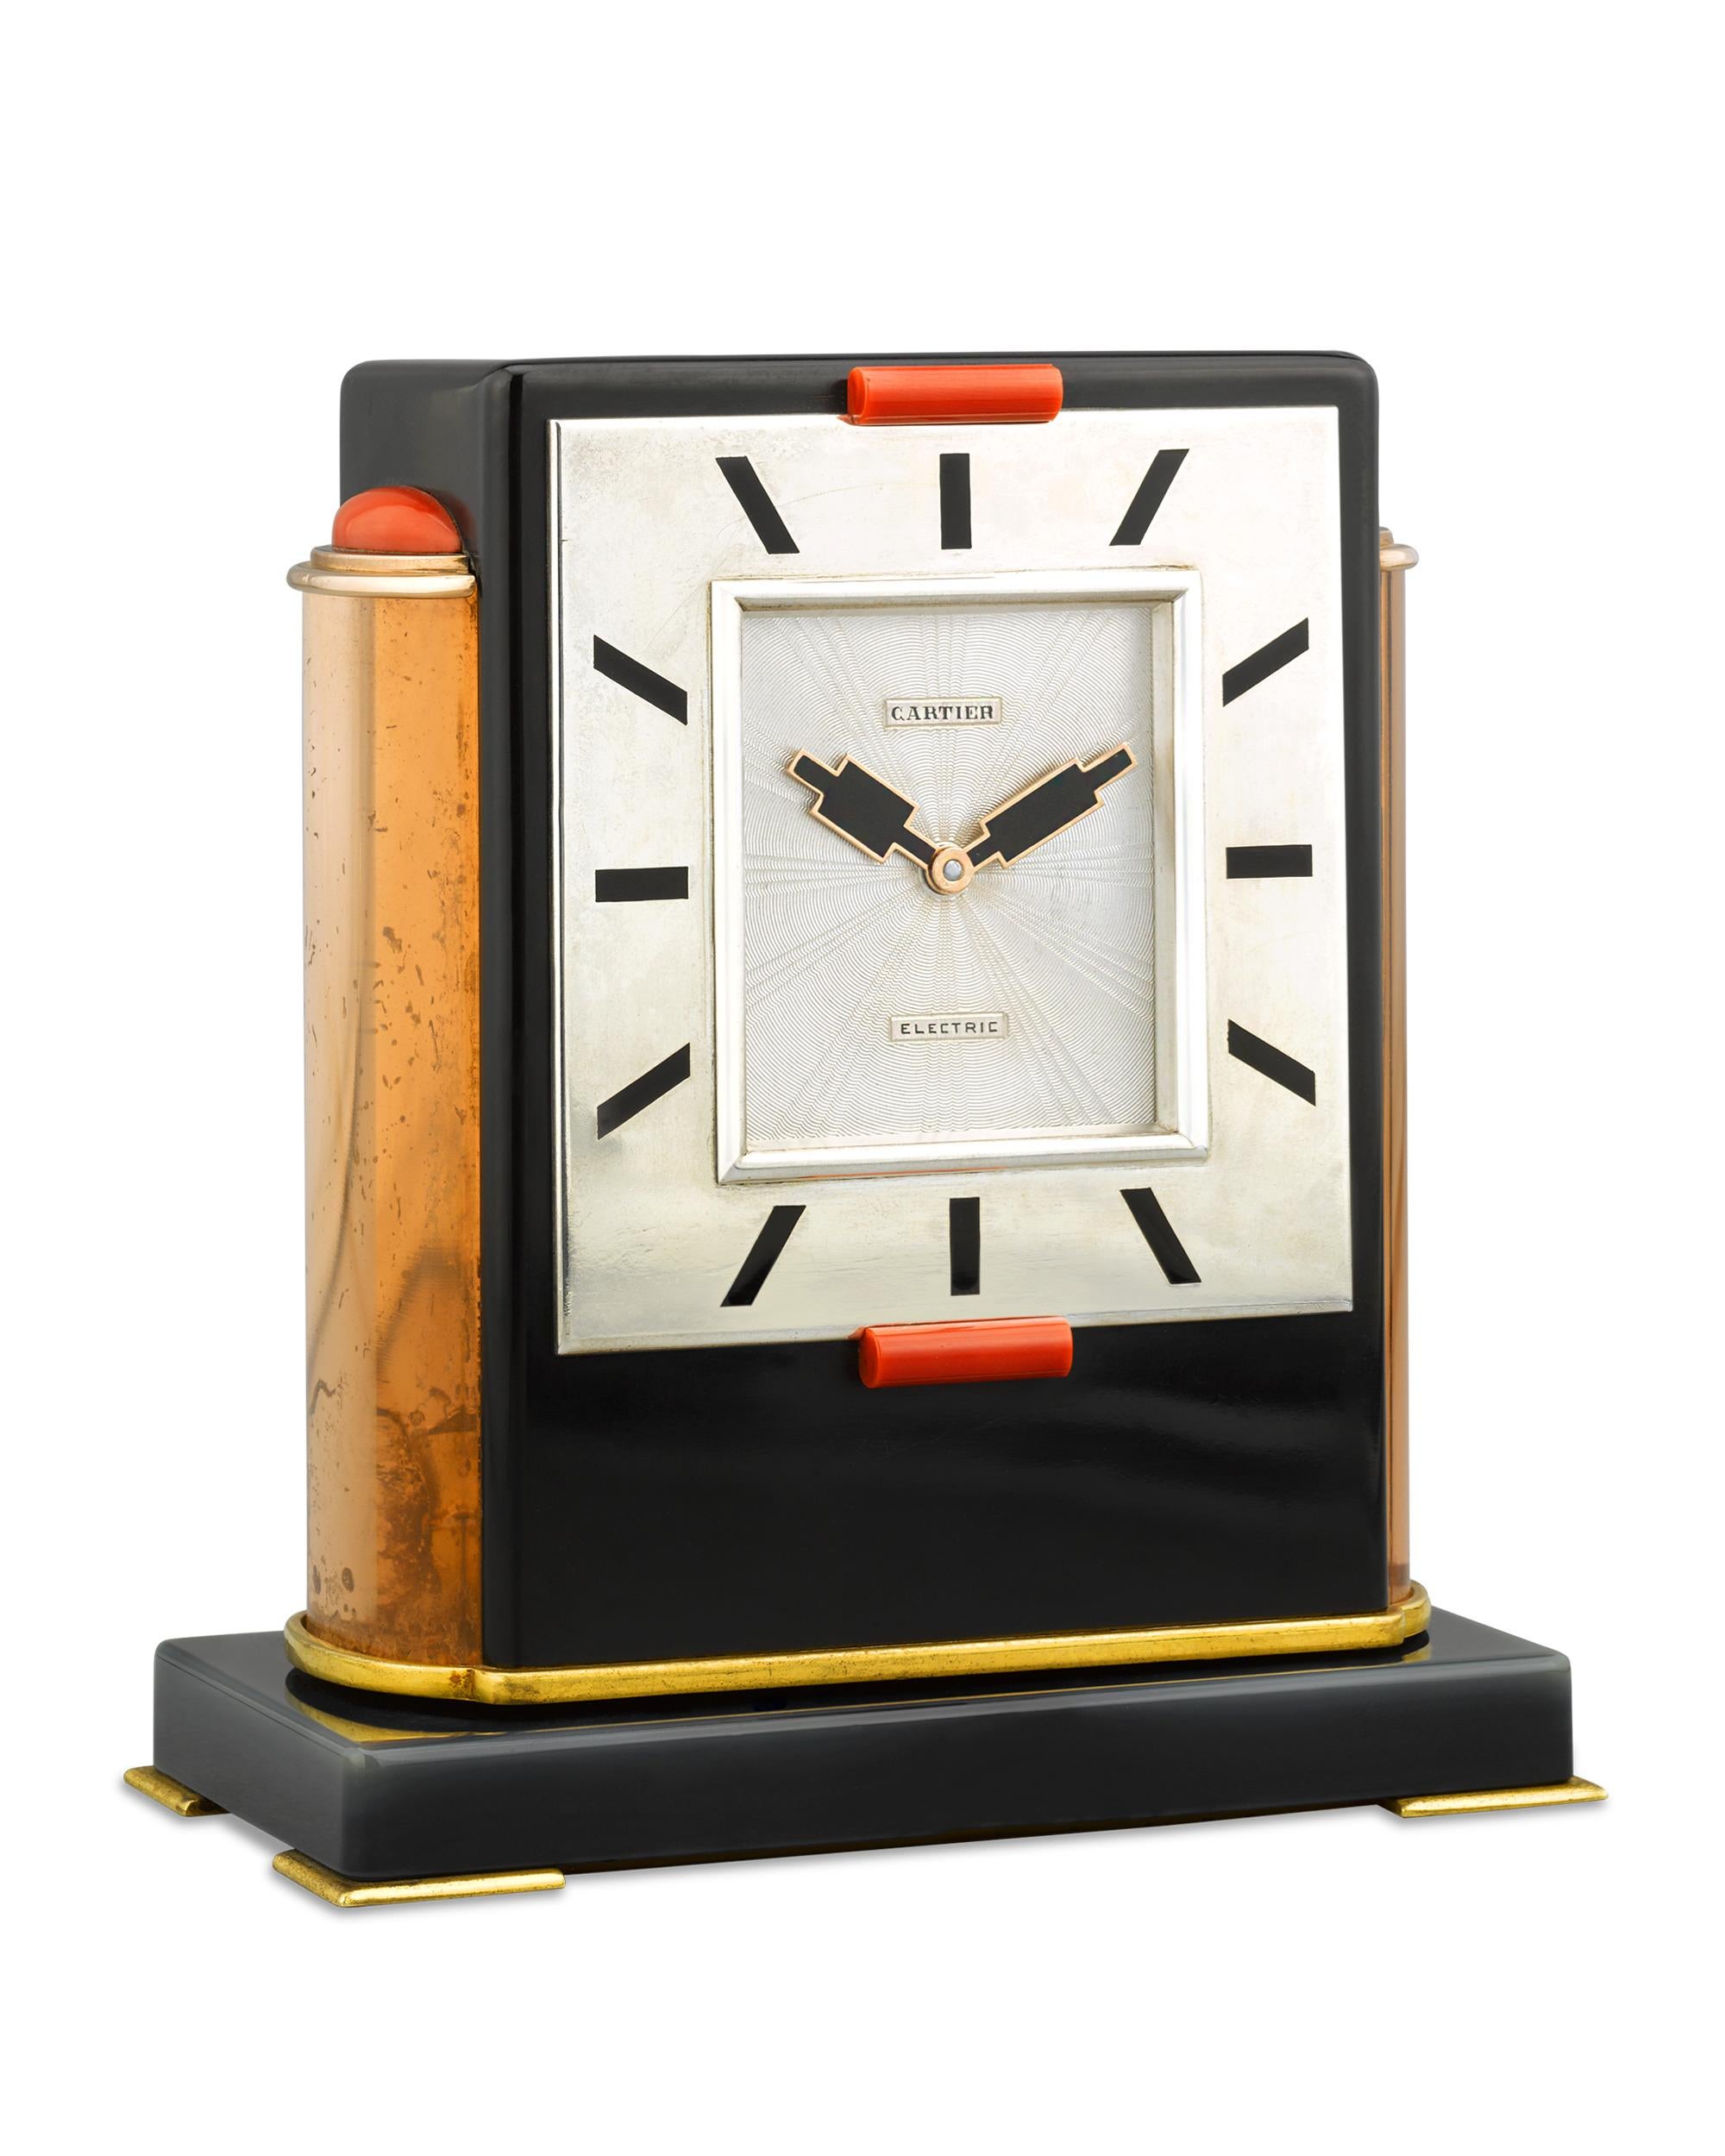 This Art Deco period table clock by Cartier is an extremely rare find and in a class of its own. Crafted of black lacquer, no detail was spared by the famed firm in creating this high-quality, luxury timepiece. The silver square dial, signed